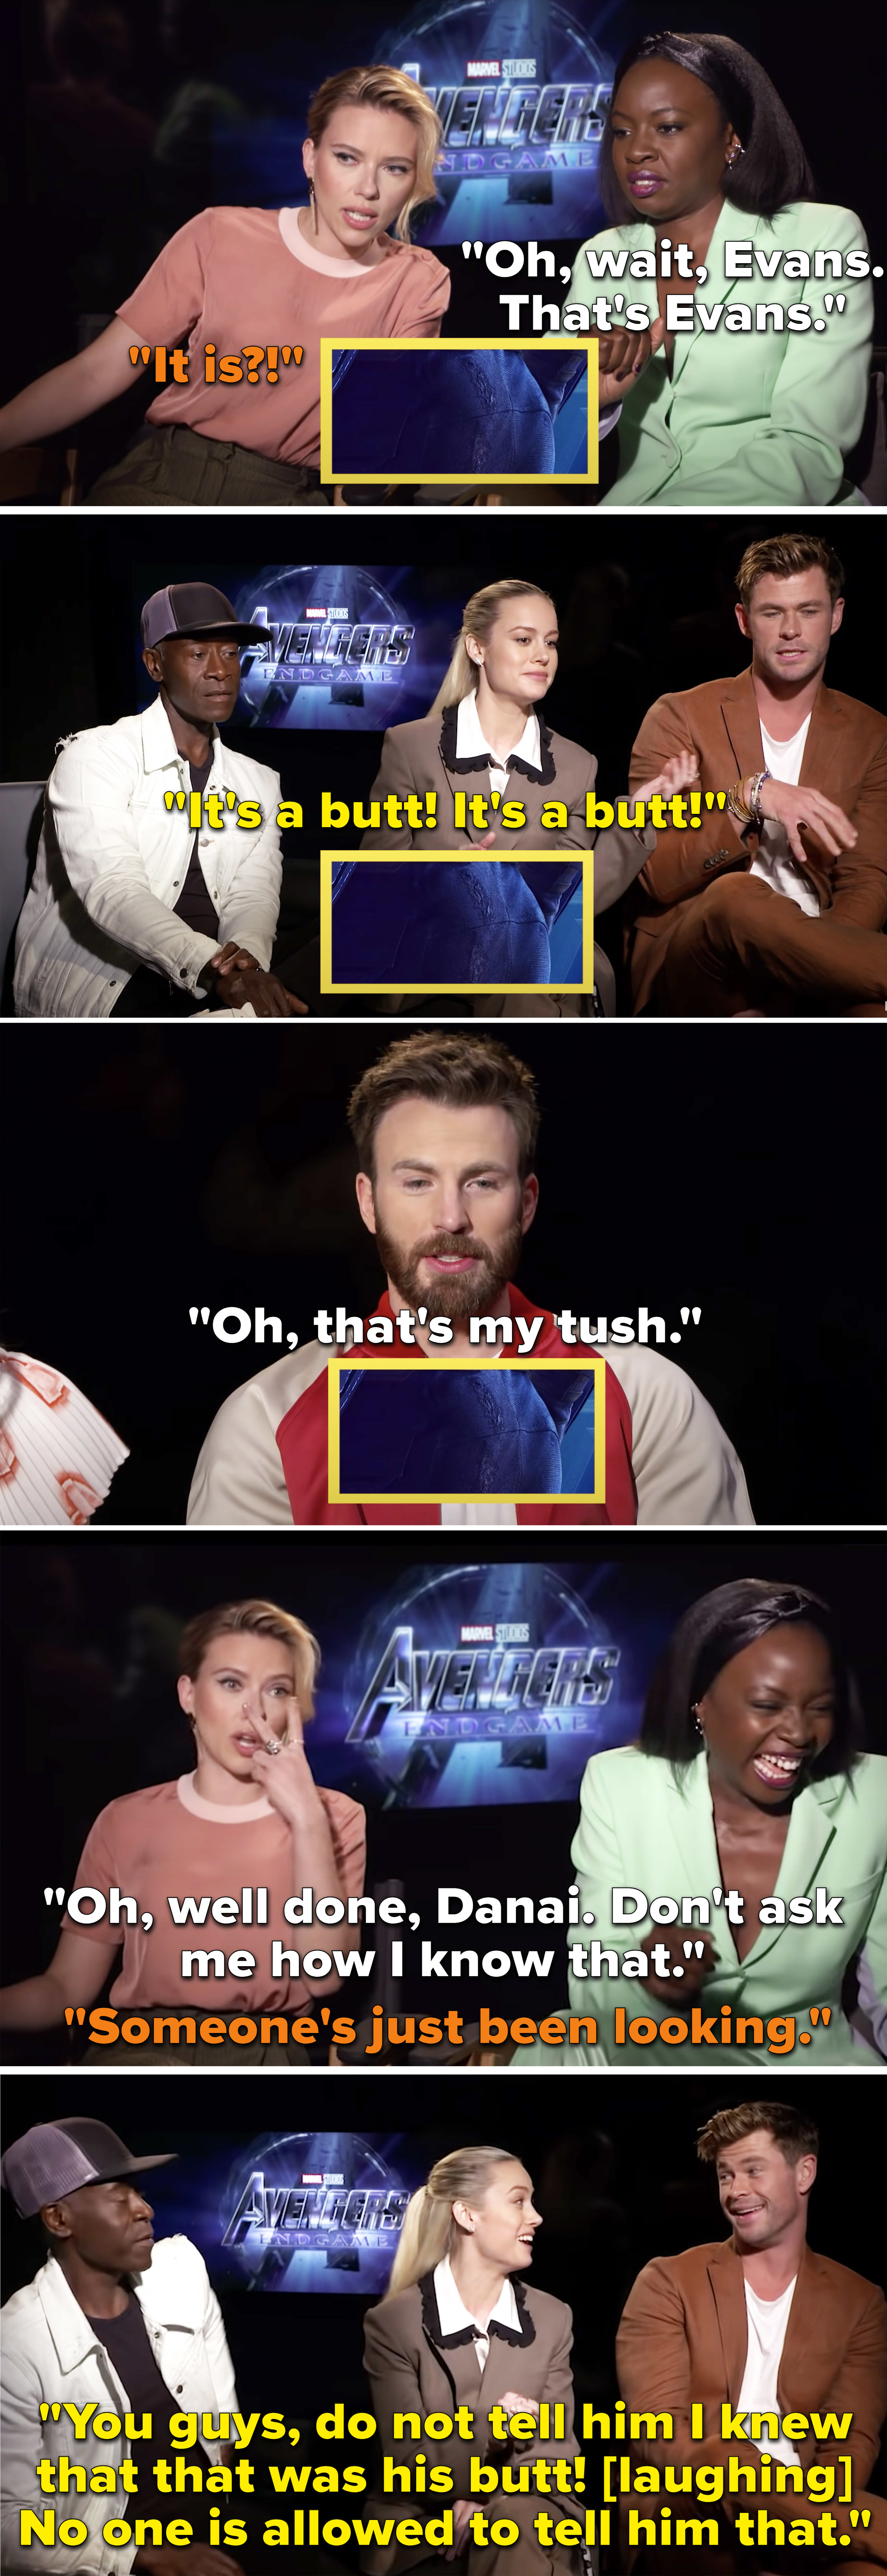 Danai Gurira and Brie Larson knowing it&#x27;s Chris Evans&#x27; butt right away and laughing about it